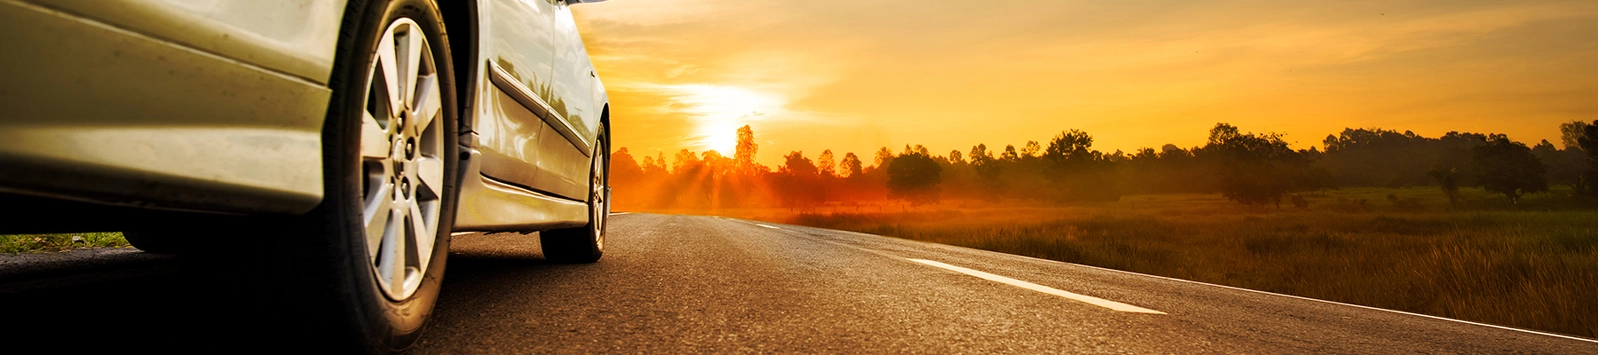 Close-up of car driving on highway with sunset and landscape